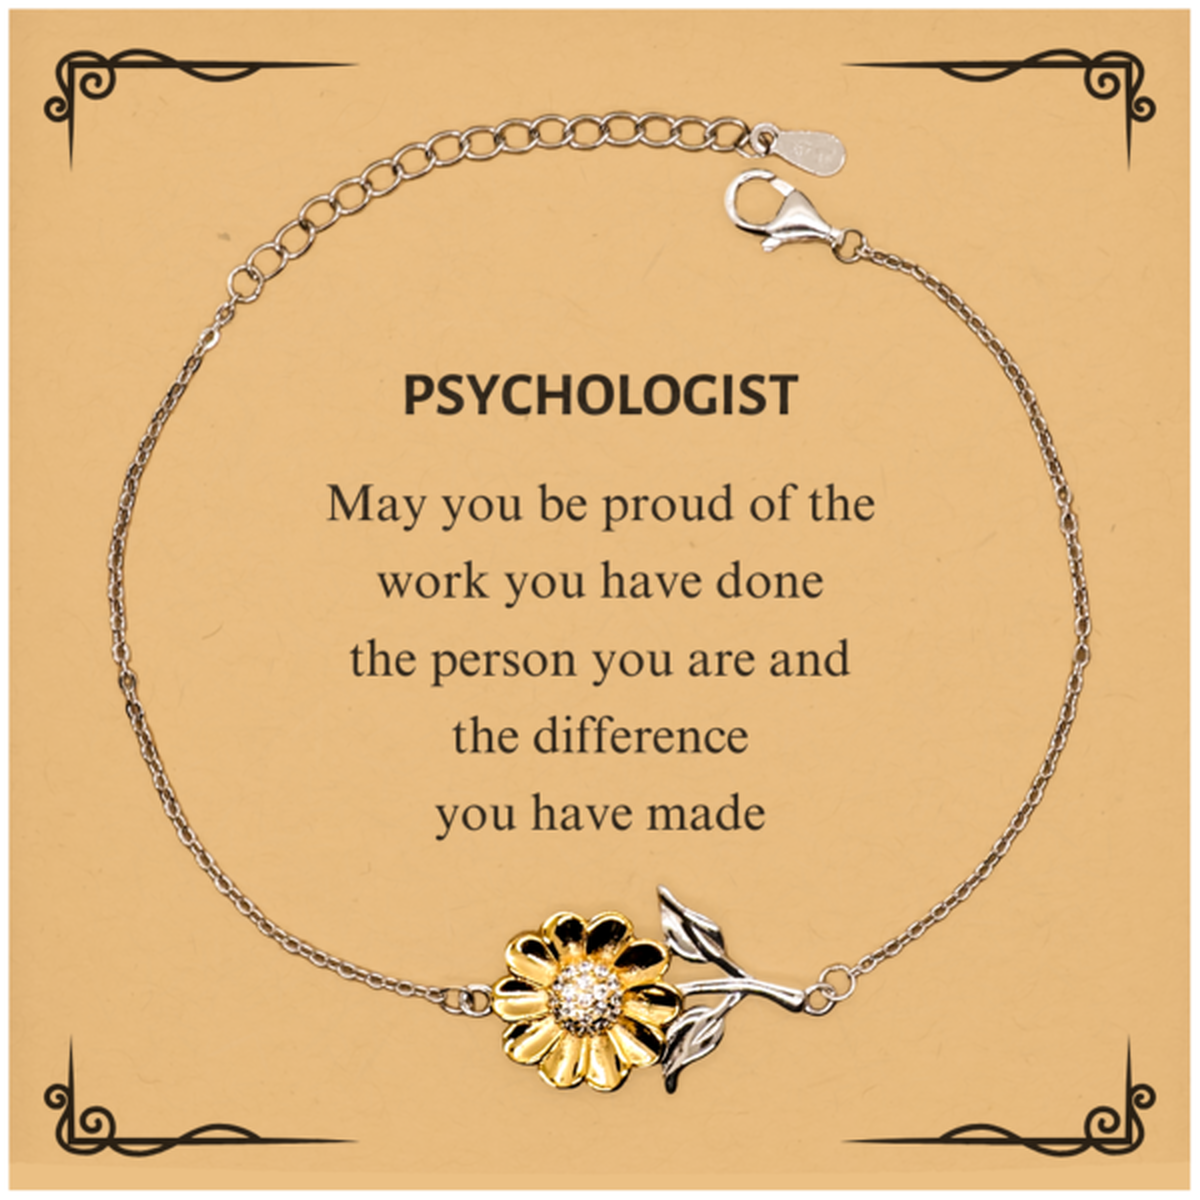 Psychologist May you be proud of the work you have done, Retirement Psychologist Sunflower Bracelet for Colleague Appreciation Gifts Amazing for Psychologist